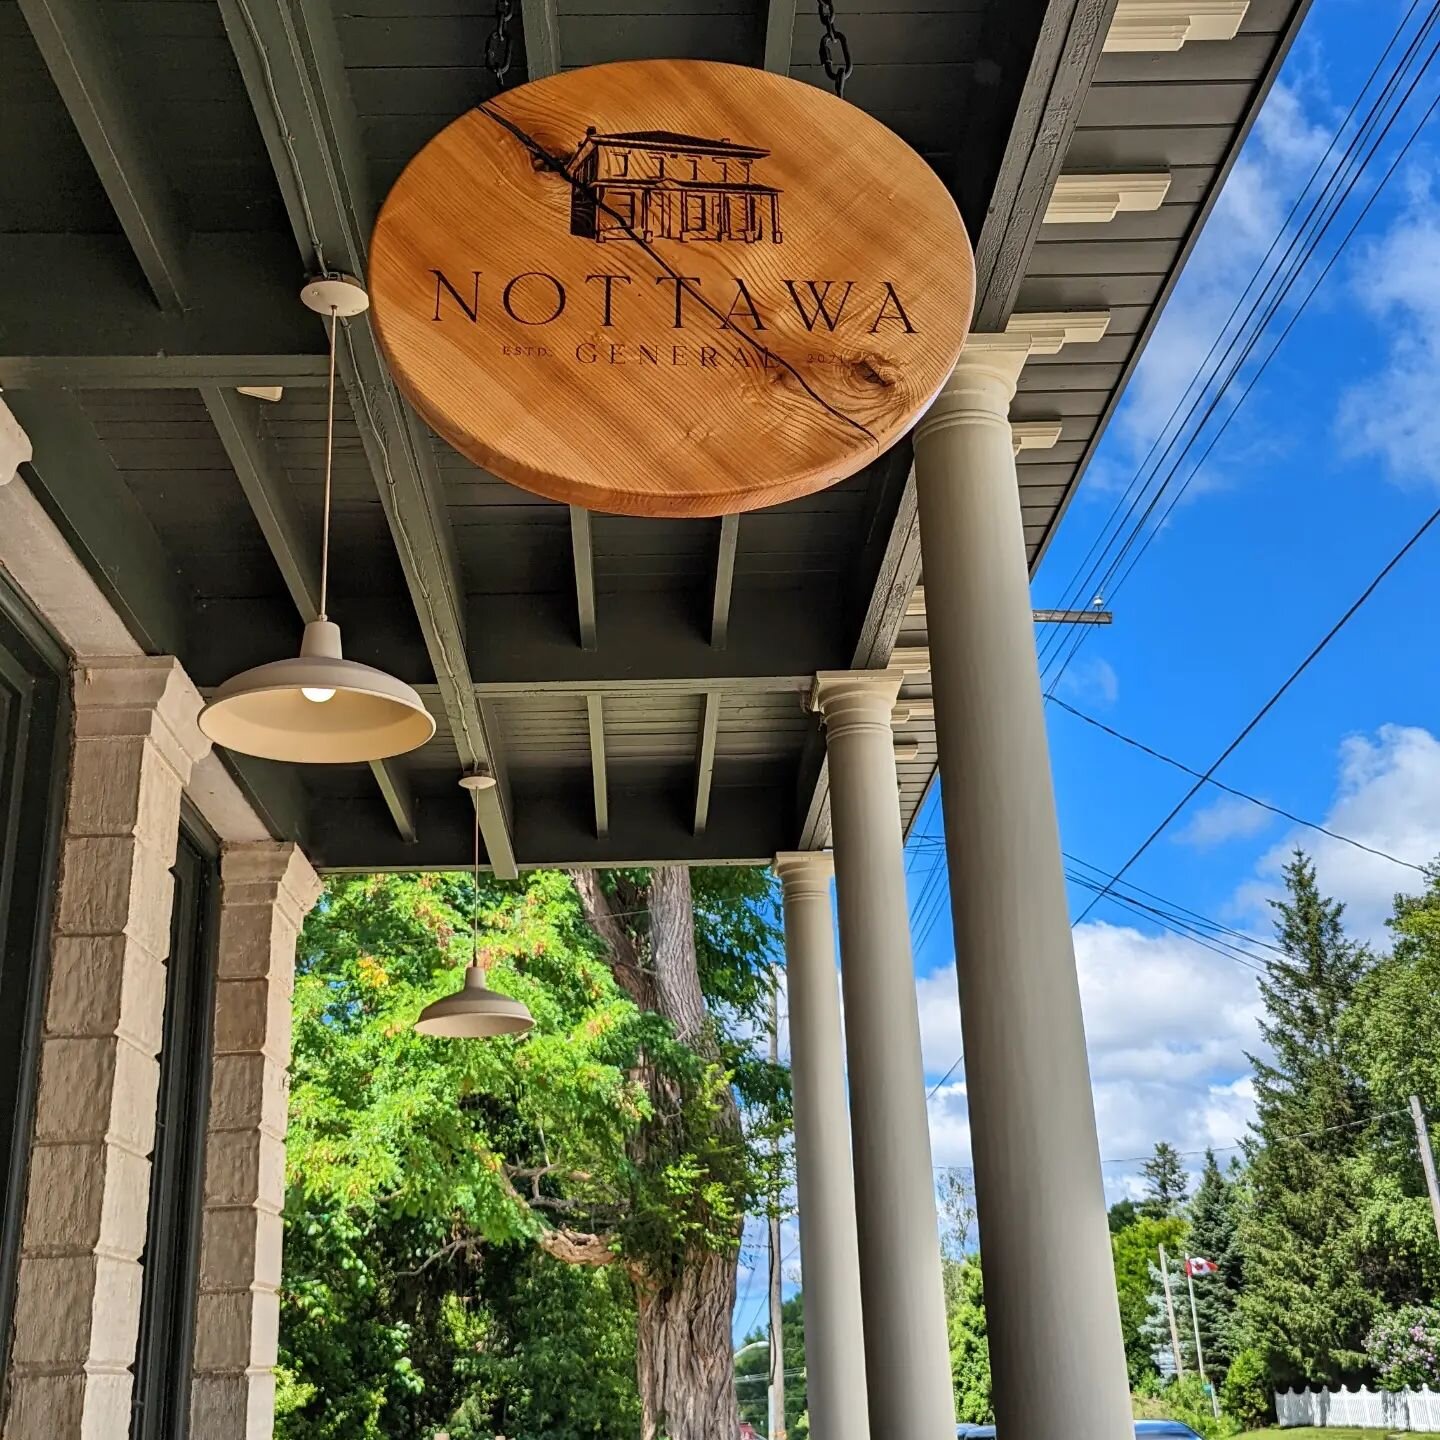 ✨NEW RETAIL PARTNER✨

Hello Nottawa! We&rsquo;re so excited to now have DGD stocked at the brand-spankin&rsquo;-new Nottawa General!

A unique spot that offers groceries, gourmet gifts, nibbles, wine, coffee and art ALL under one roof!  @nottawagener